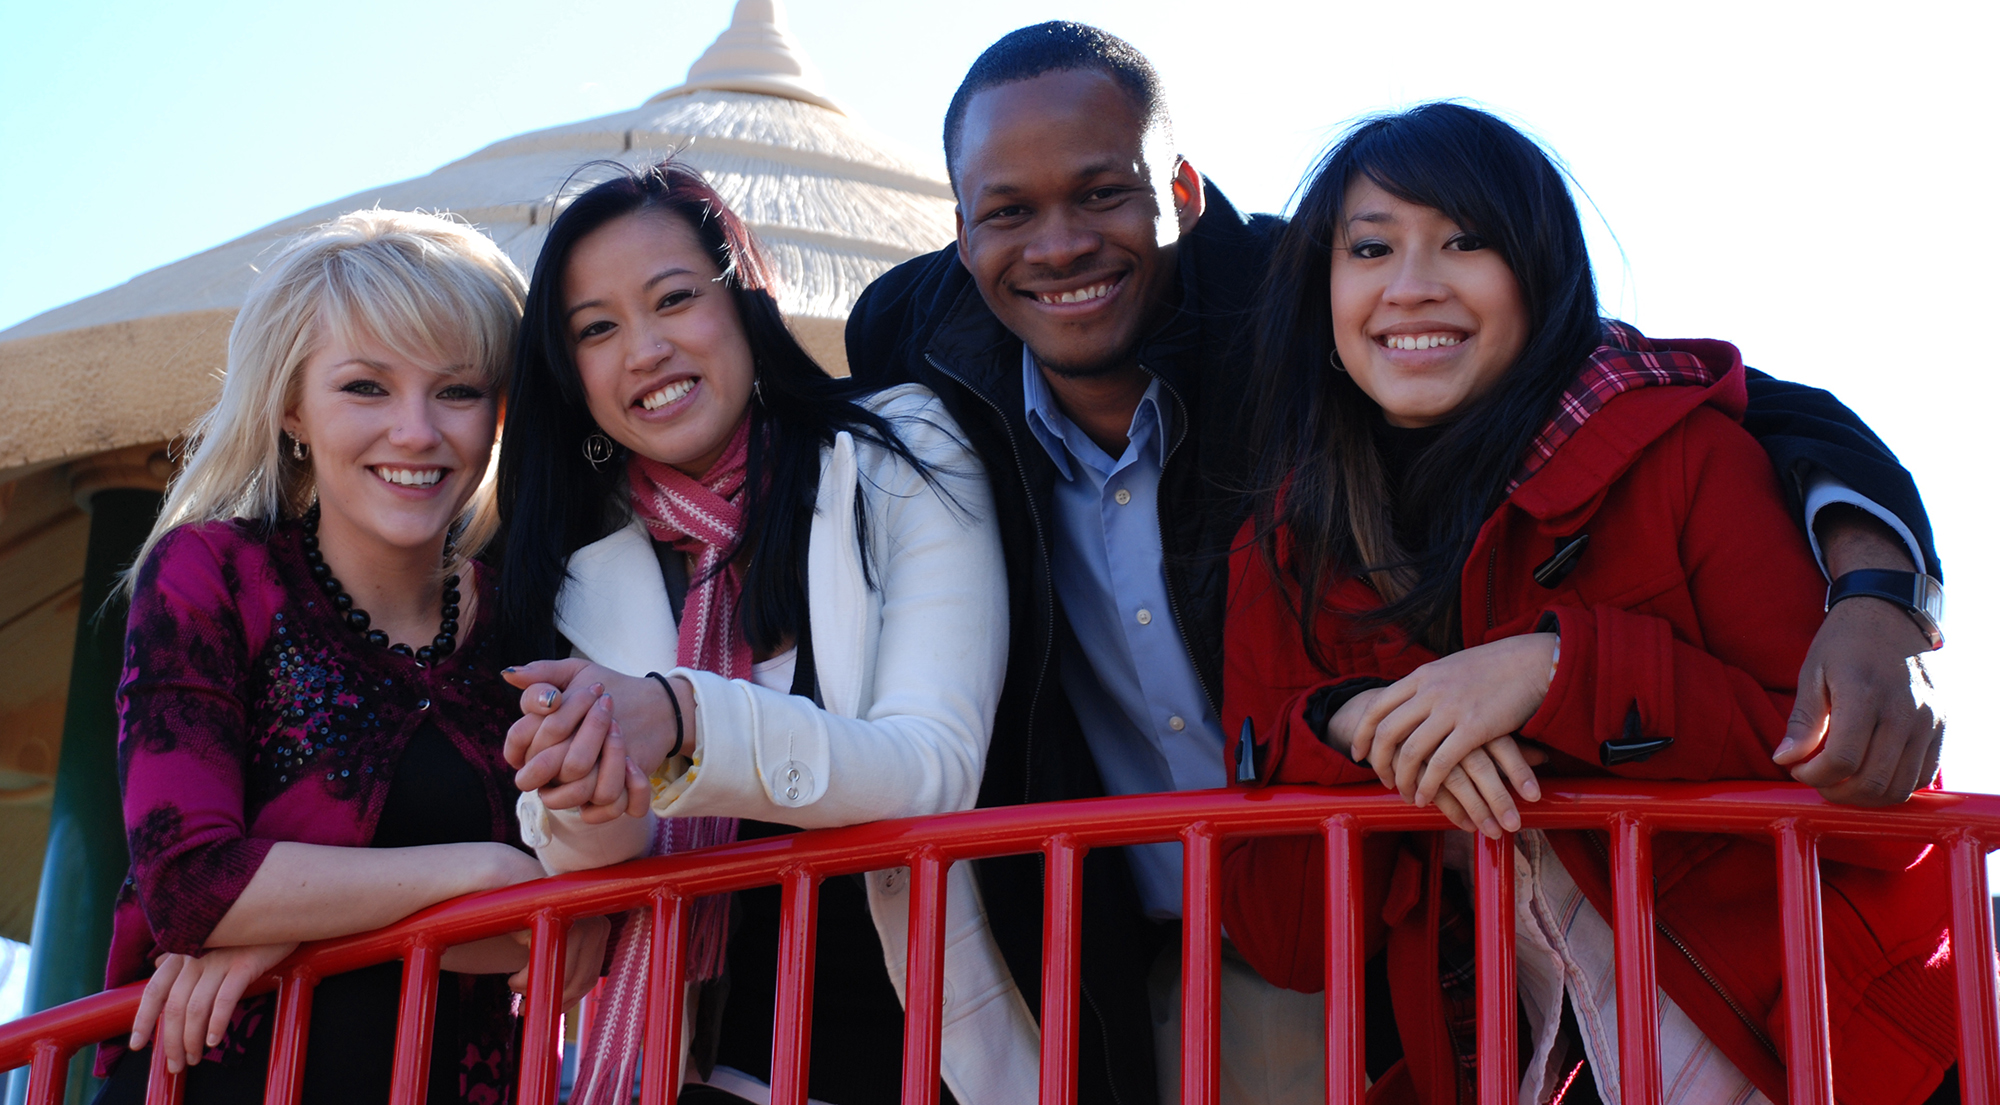 Four CCD students leaning on a red metal railing